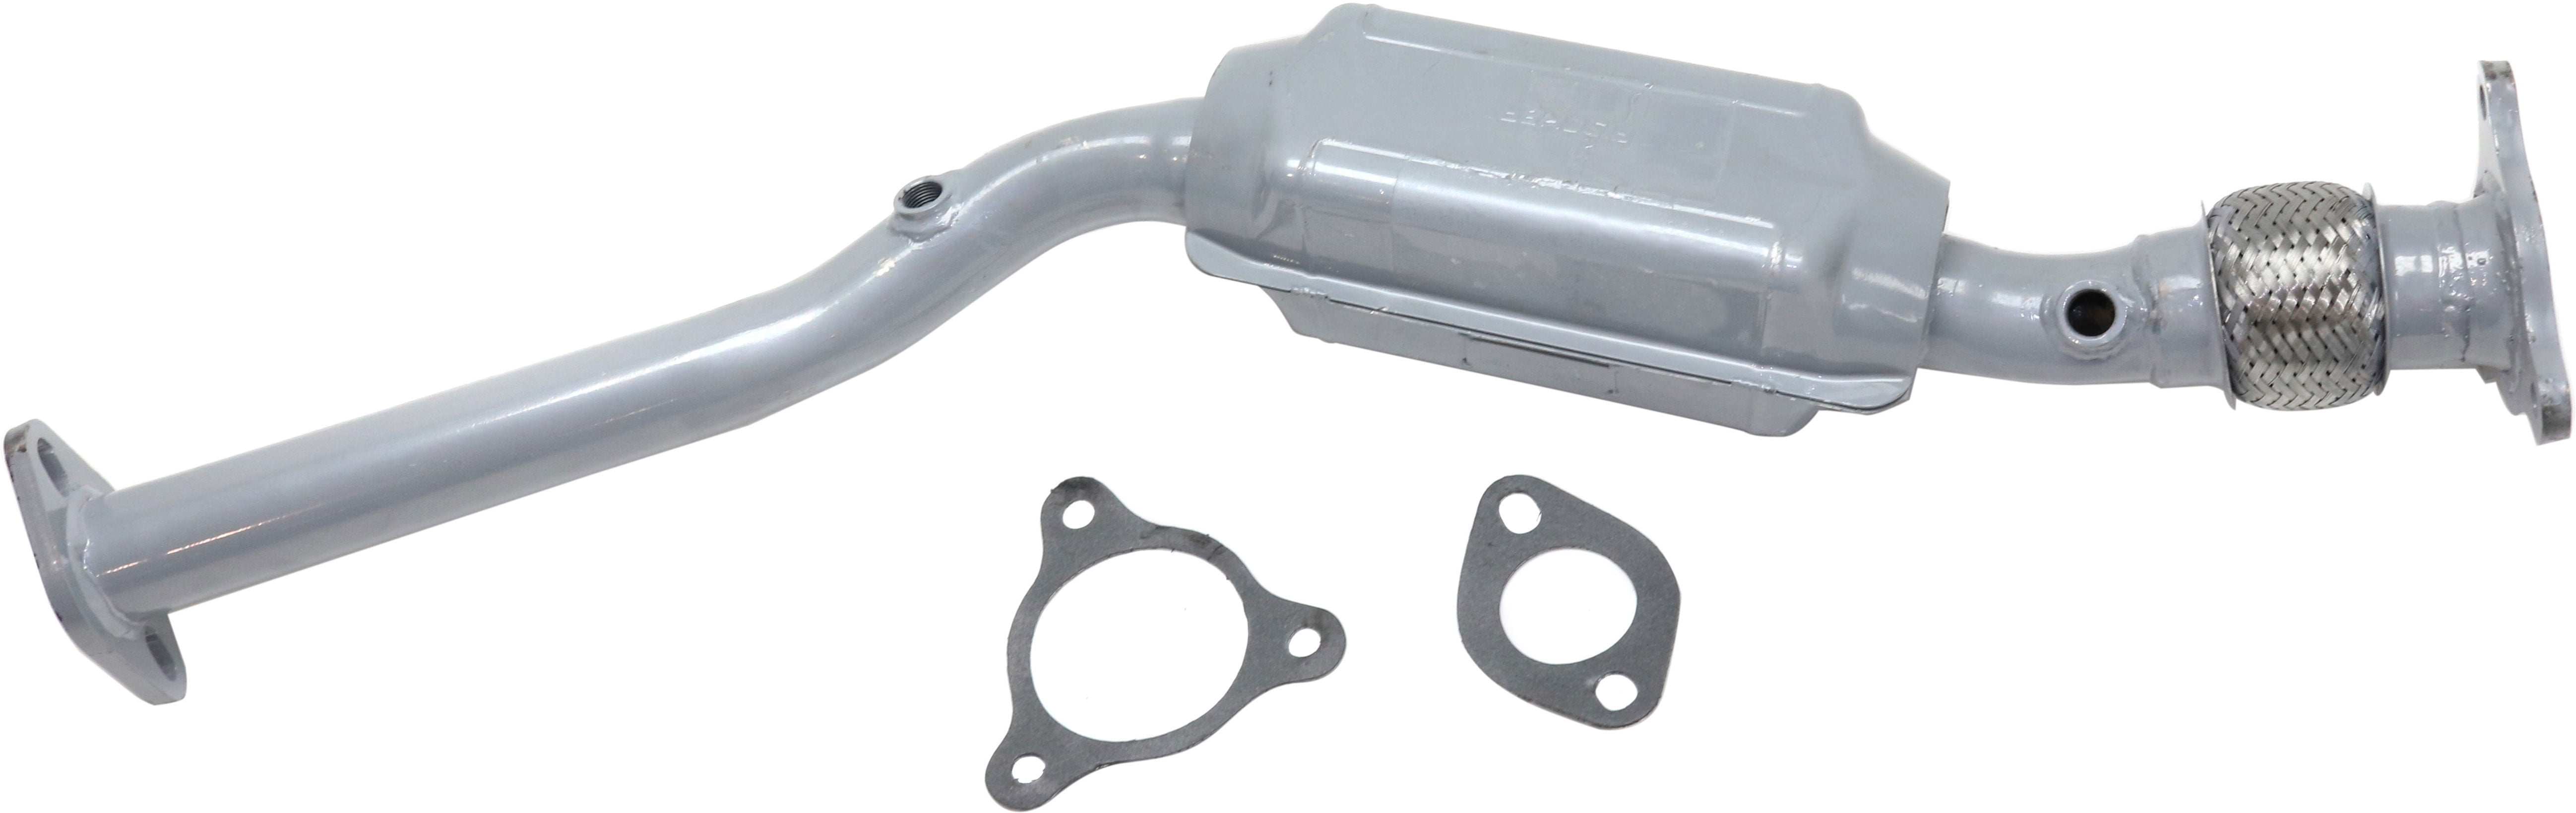 Exhaust and Tail Pipes Fits 2001-2003 Toyota RAV4 2.0L L4 GAS DOHC